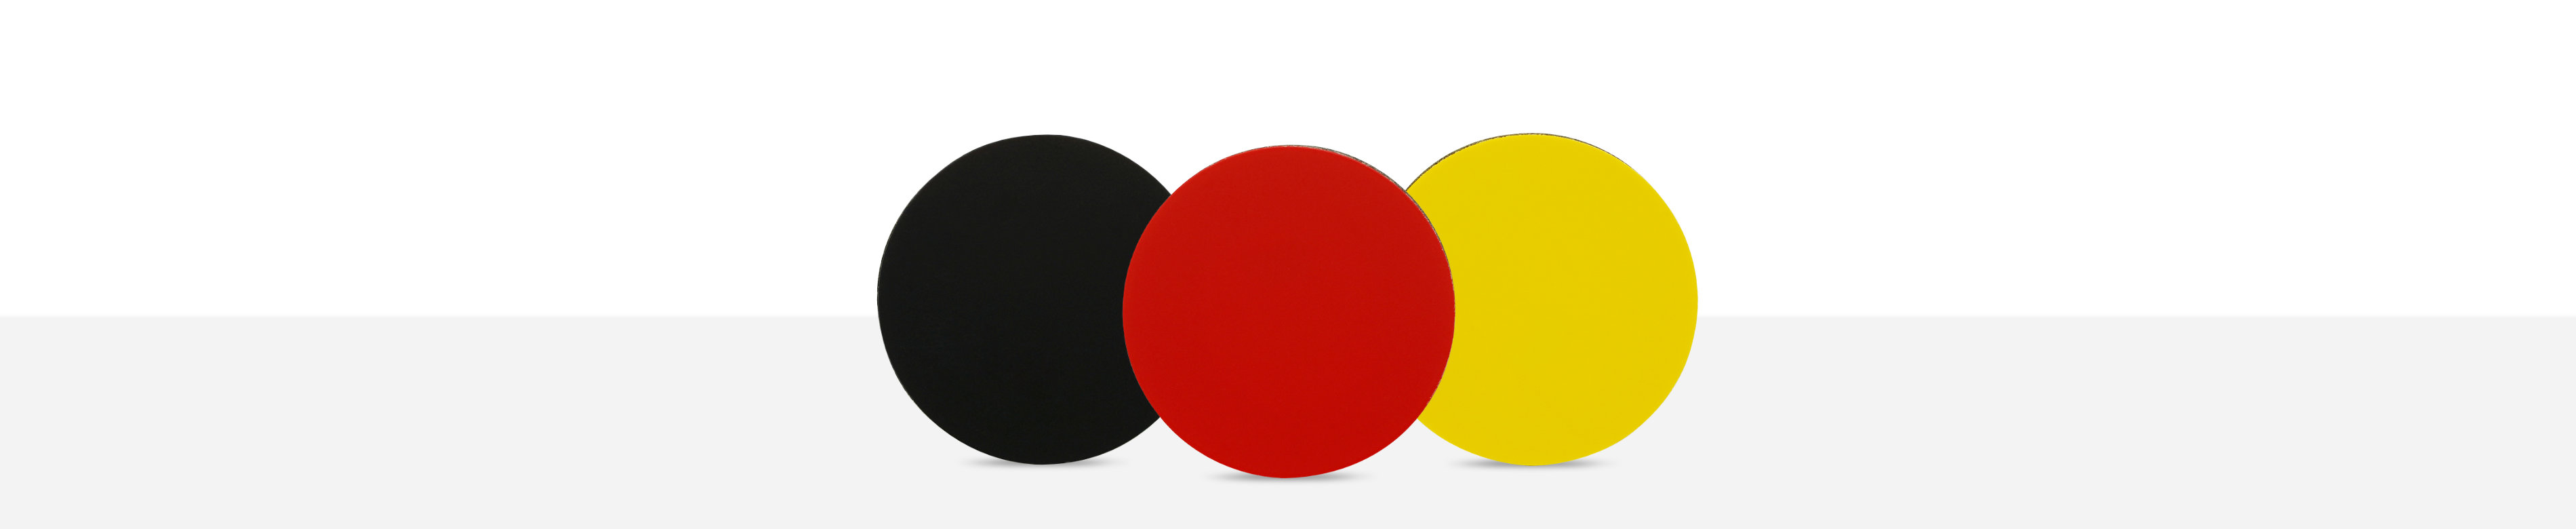 Industry PVC coins in black, red and yellow